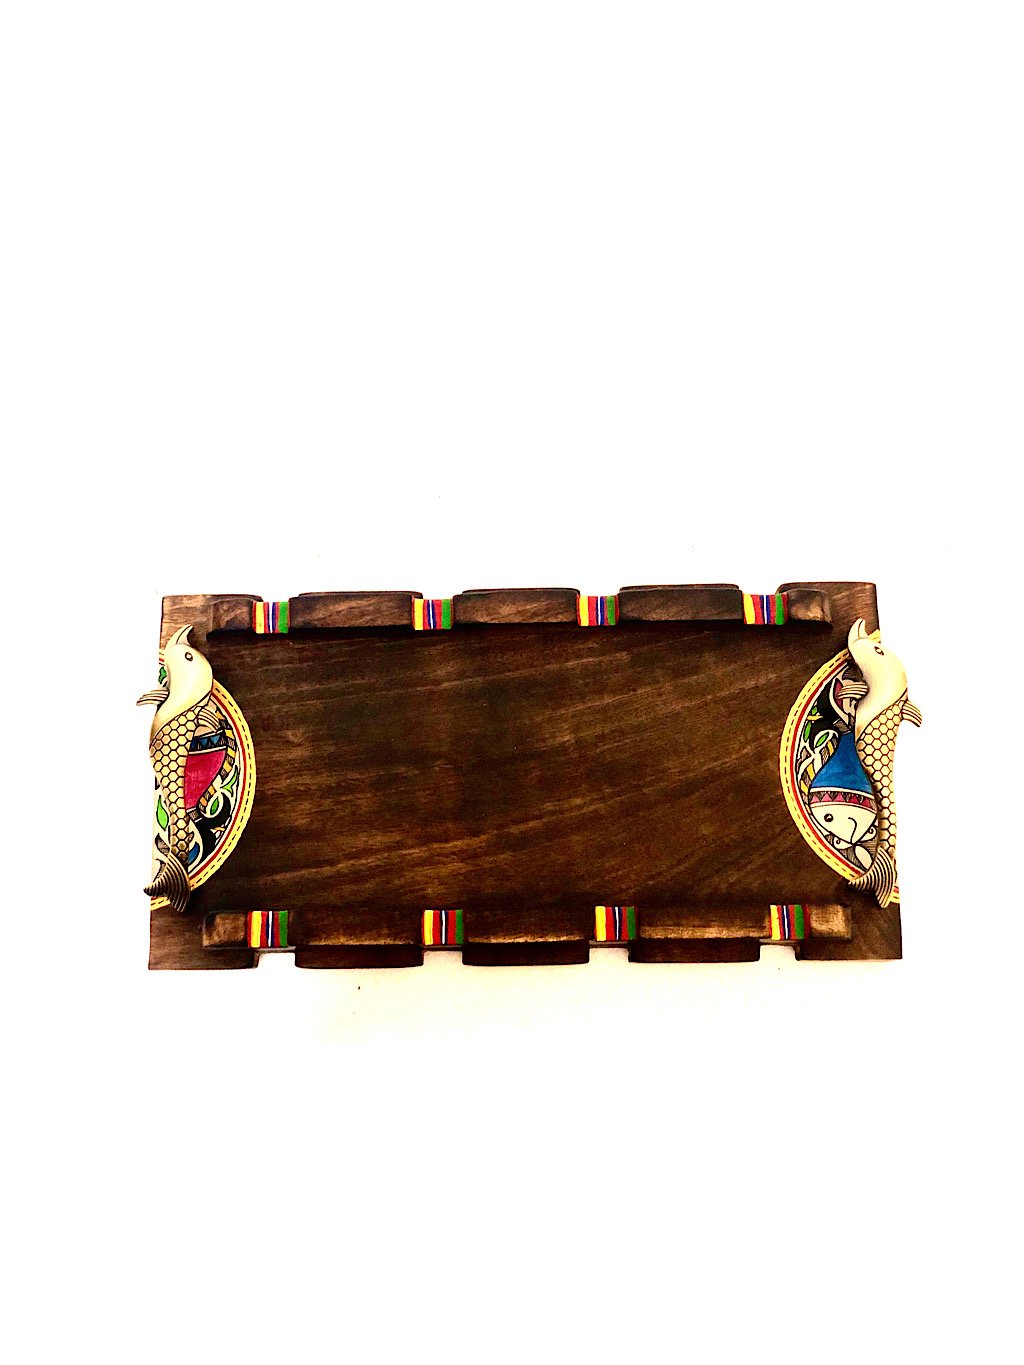 New Mid-Size Excellent Wooden Tray Painted With Vibrant Colors Tamrapatra - Tanariri Hastakala